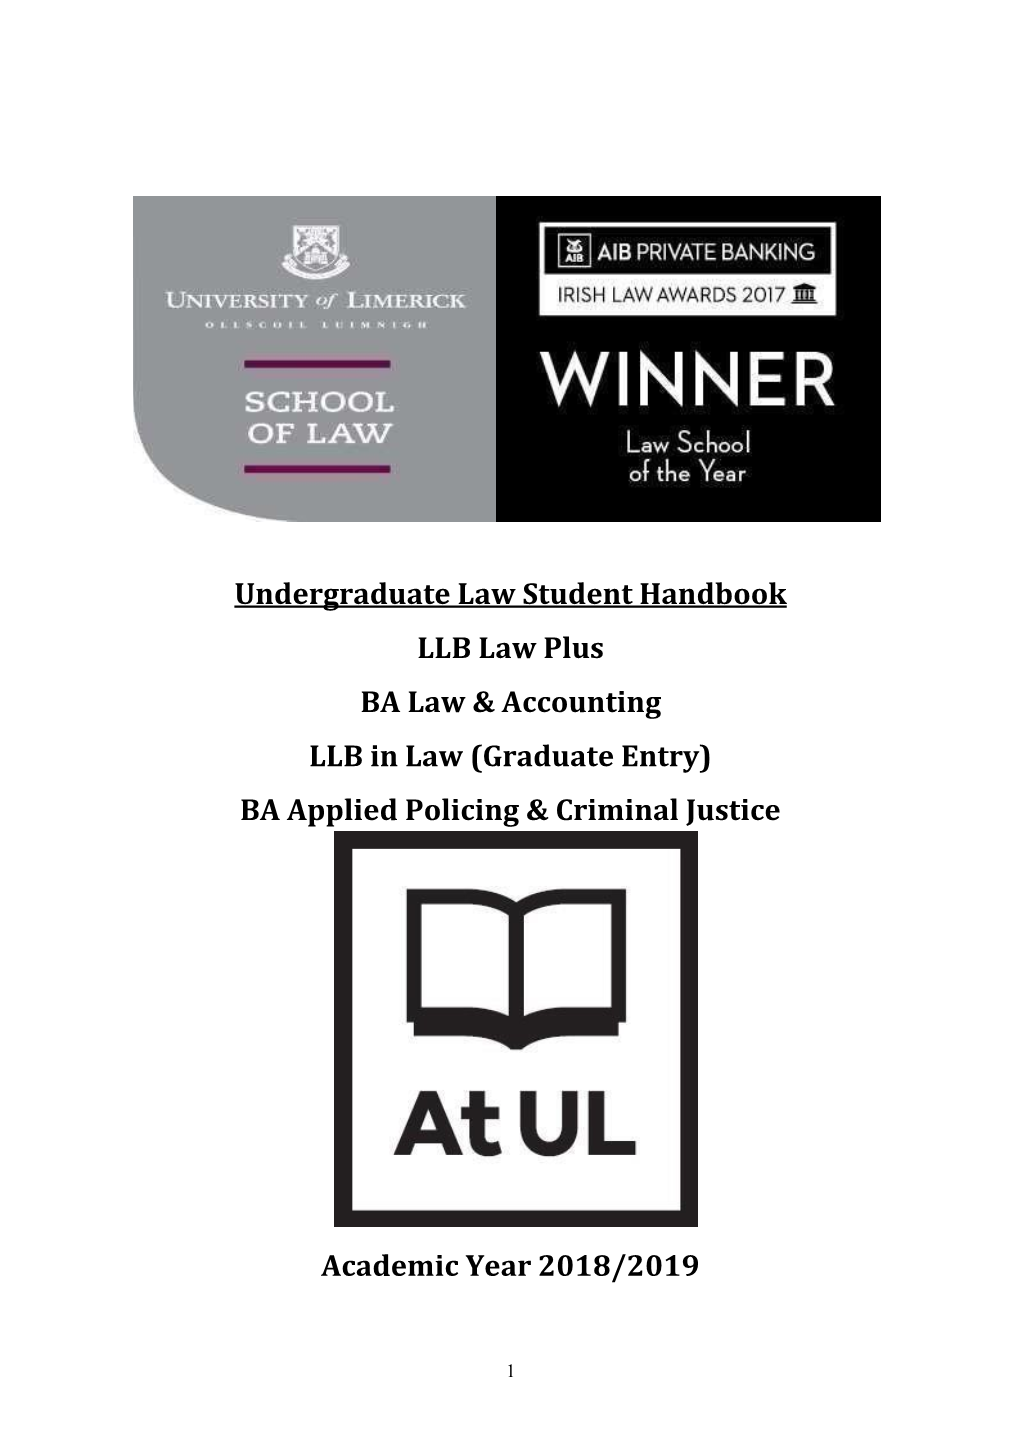 Bachelor of Arts in Law & Accounting